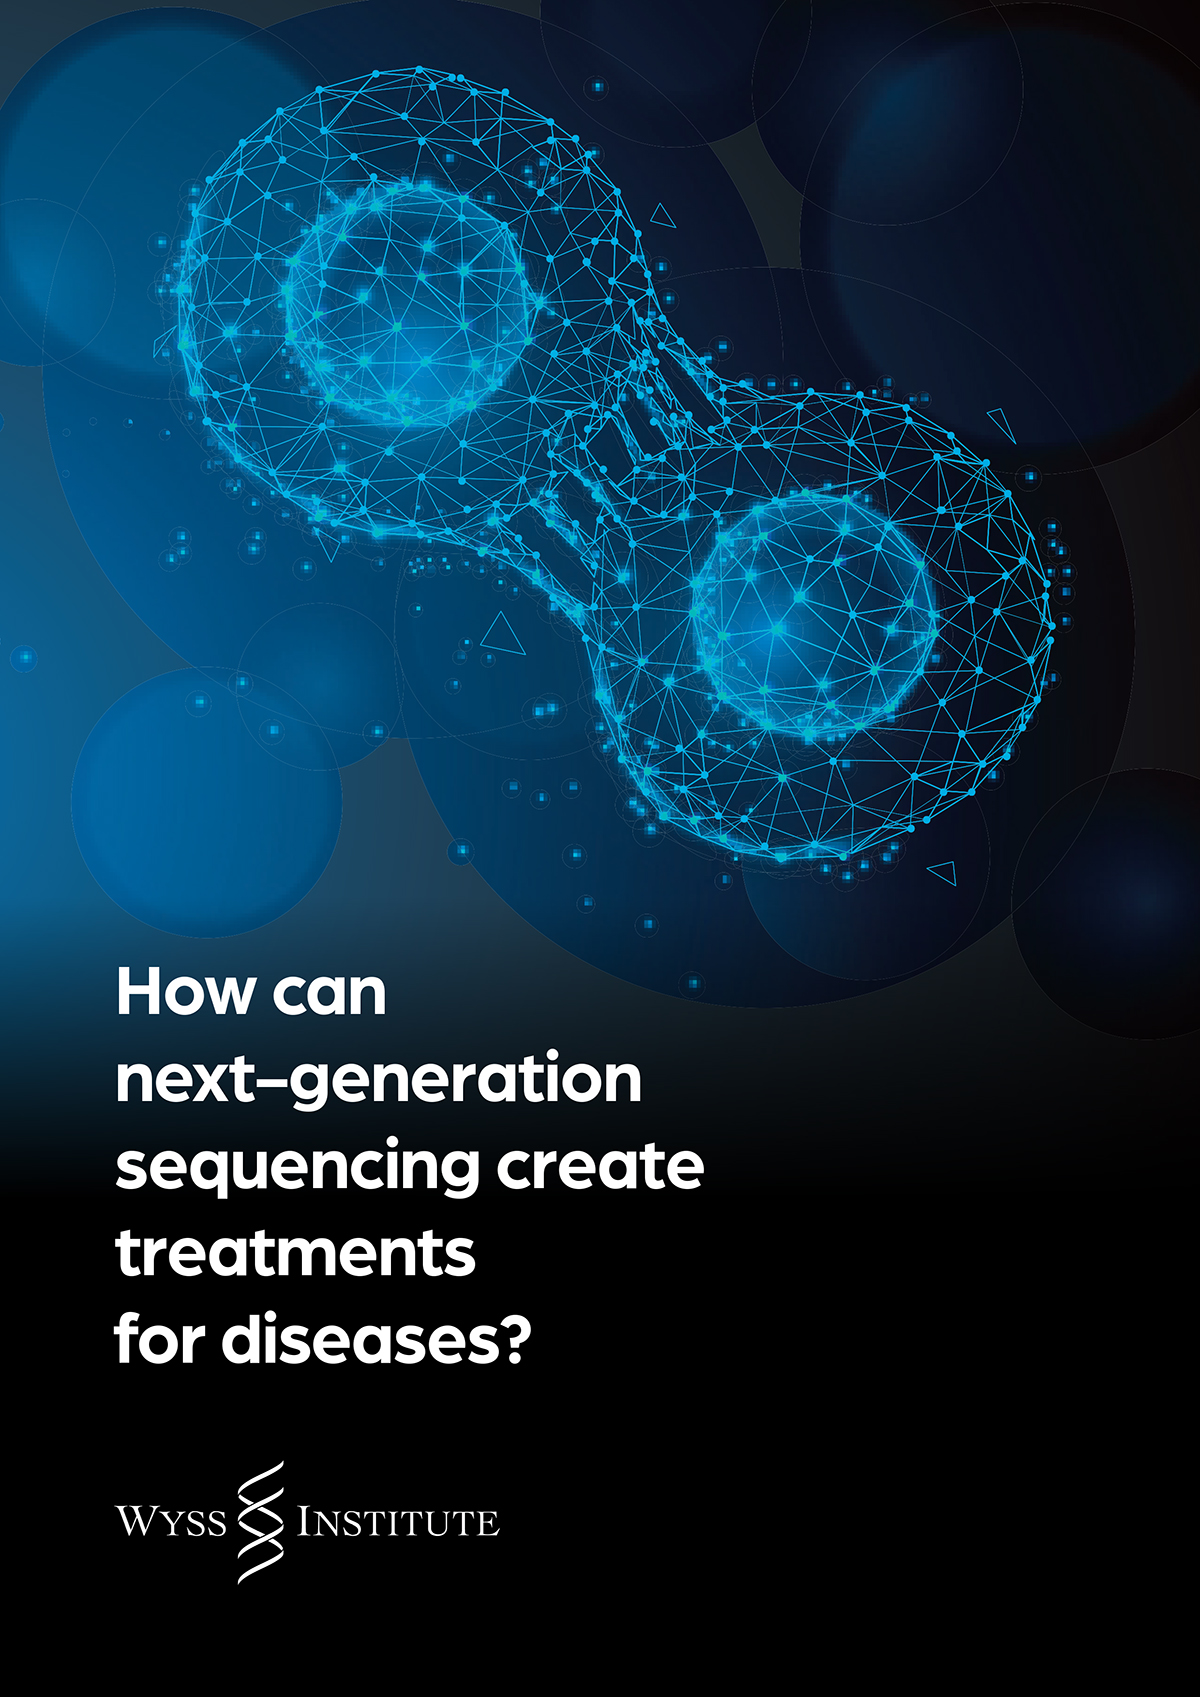 next-generation sequencing